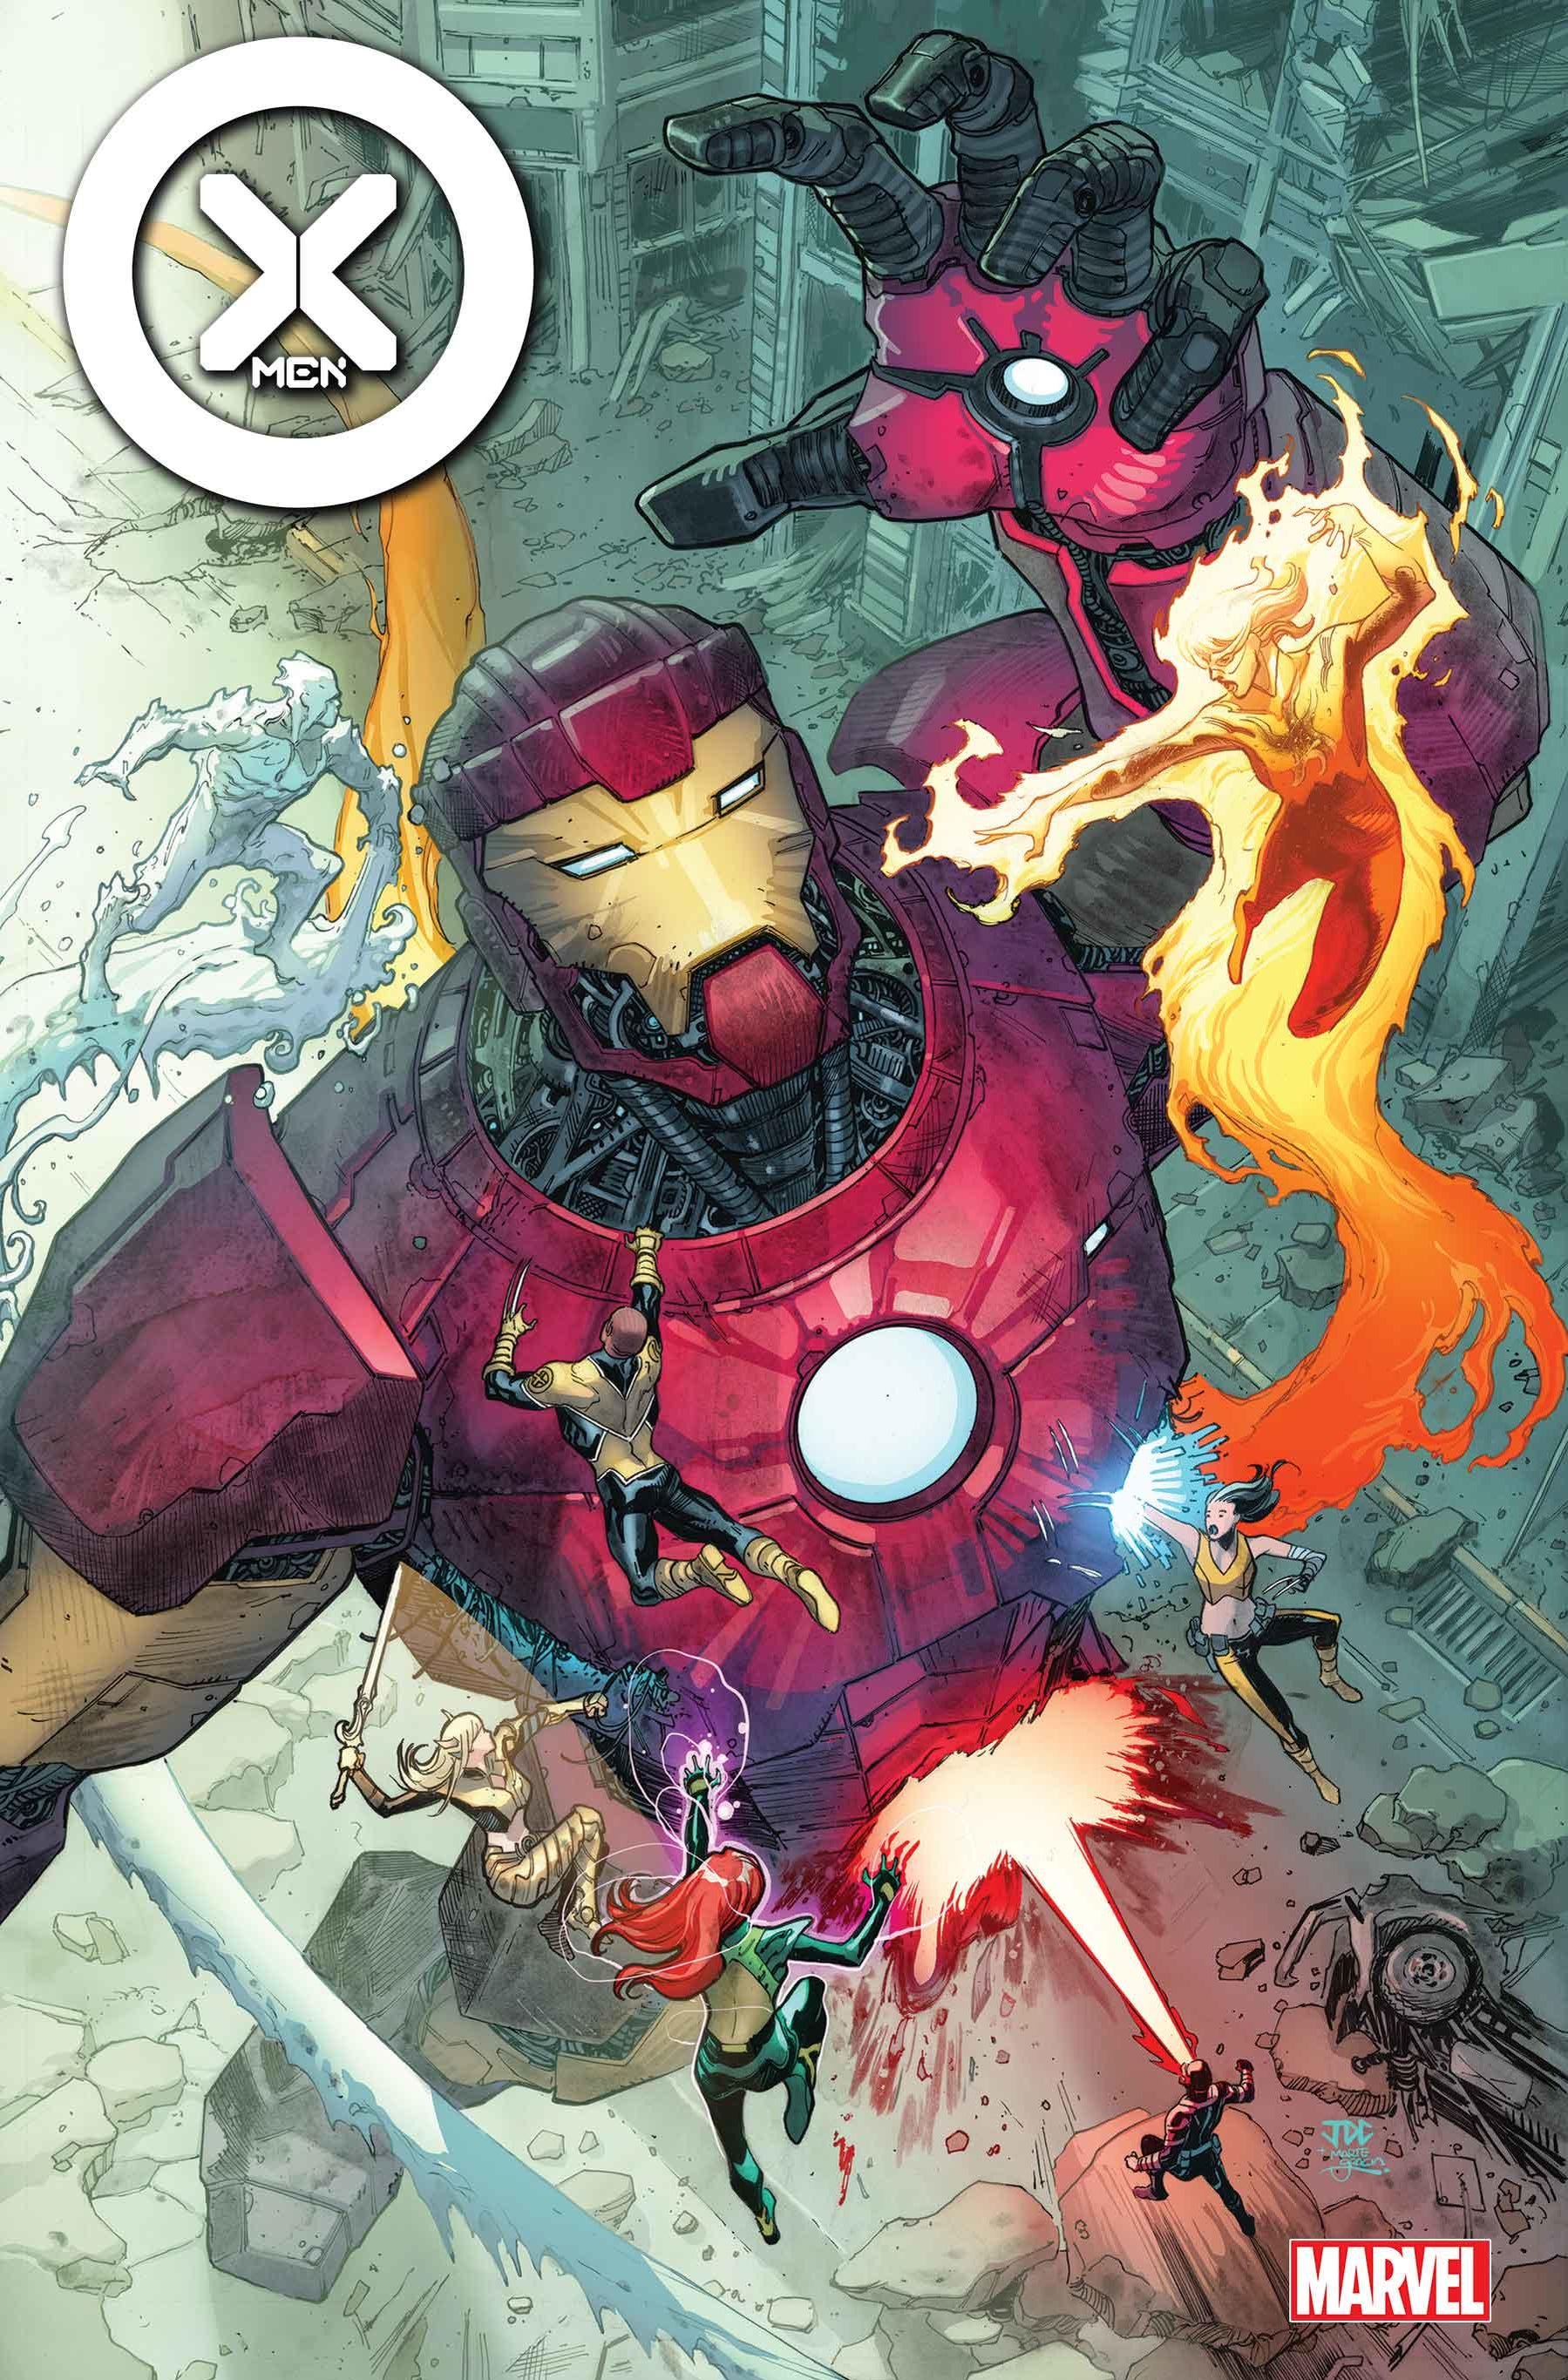 Marvel Teases Stark Sentinels in X-Men and Invincible Iron Man